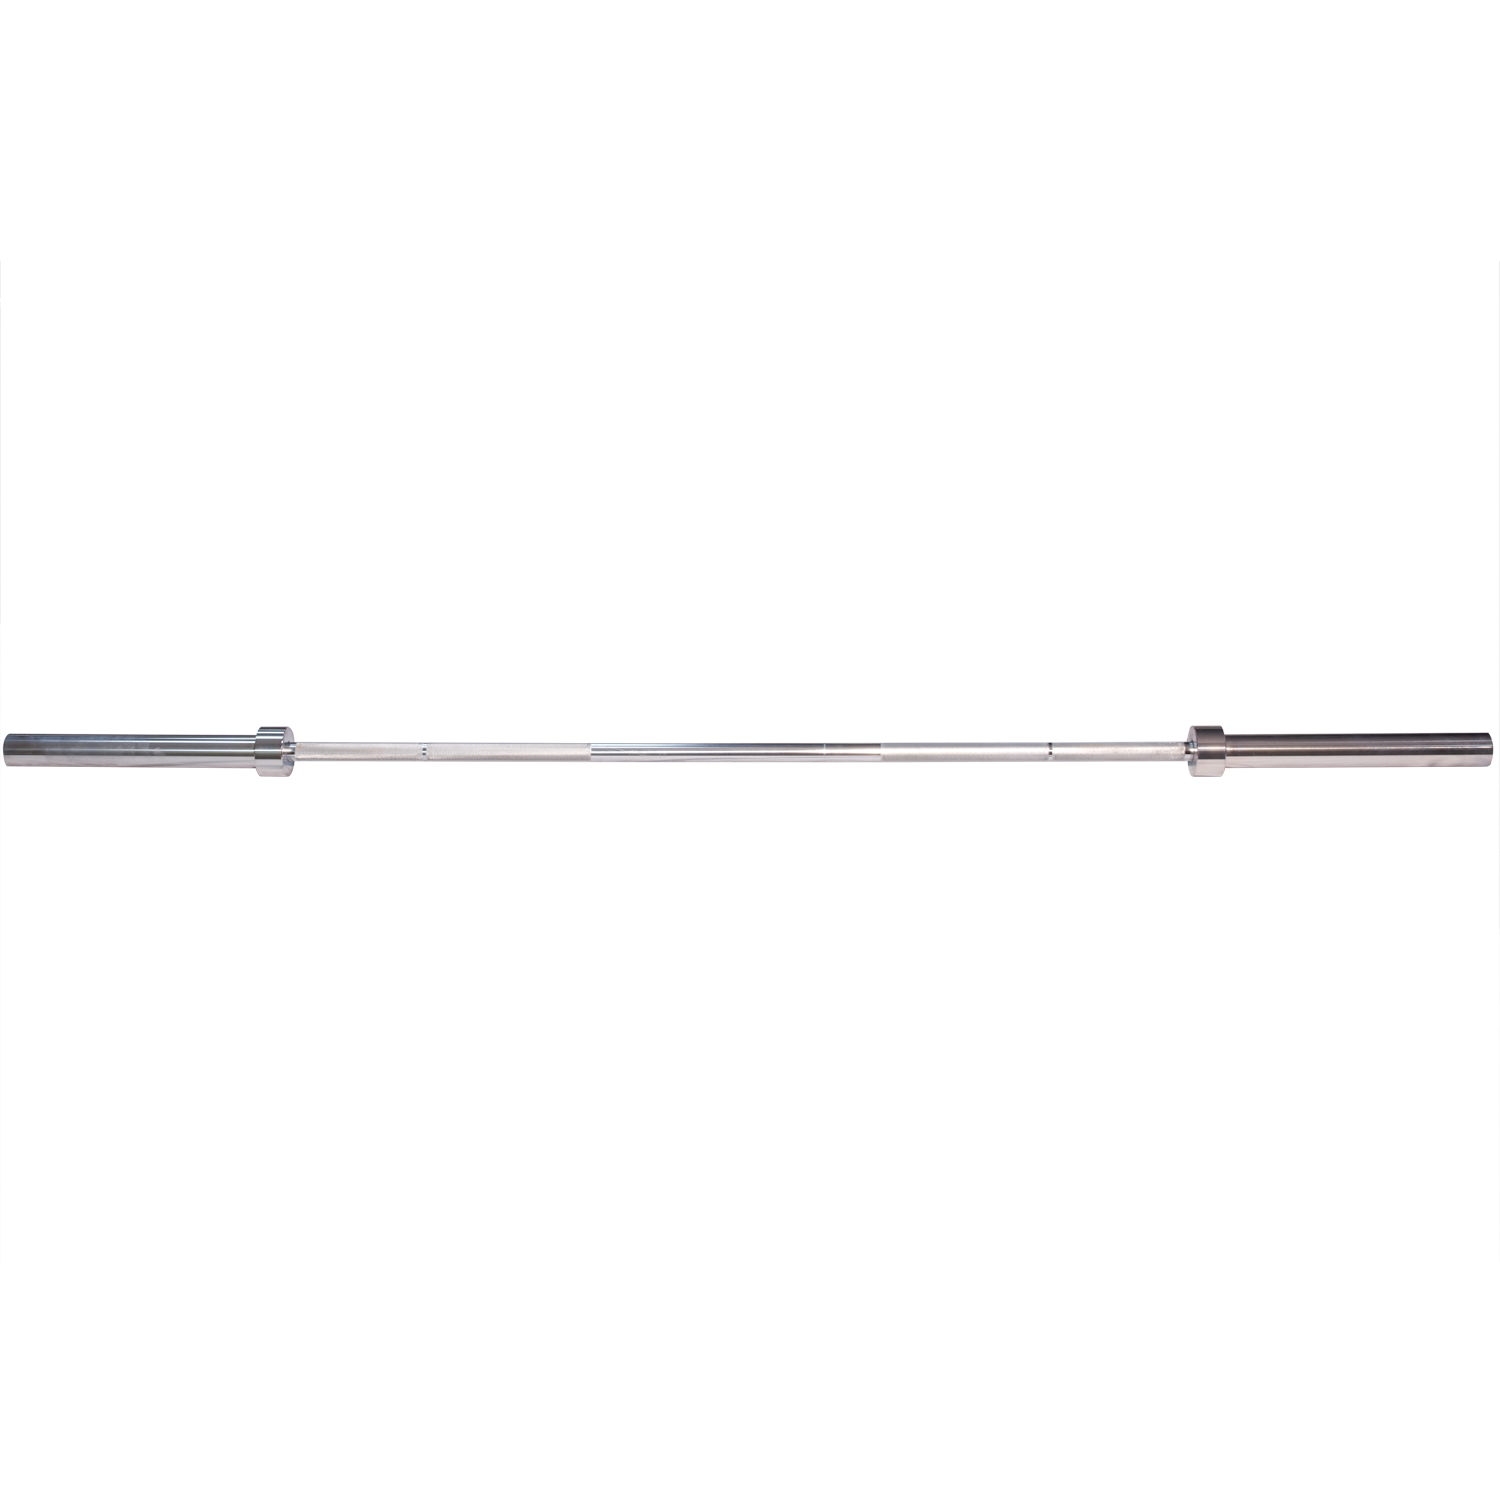 Barre Olympique - Diamètre 51mm Olympic Power Bar Silver Bodysolid - FitnessBoutique